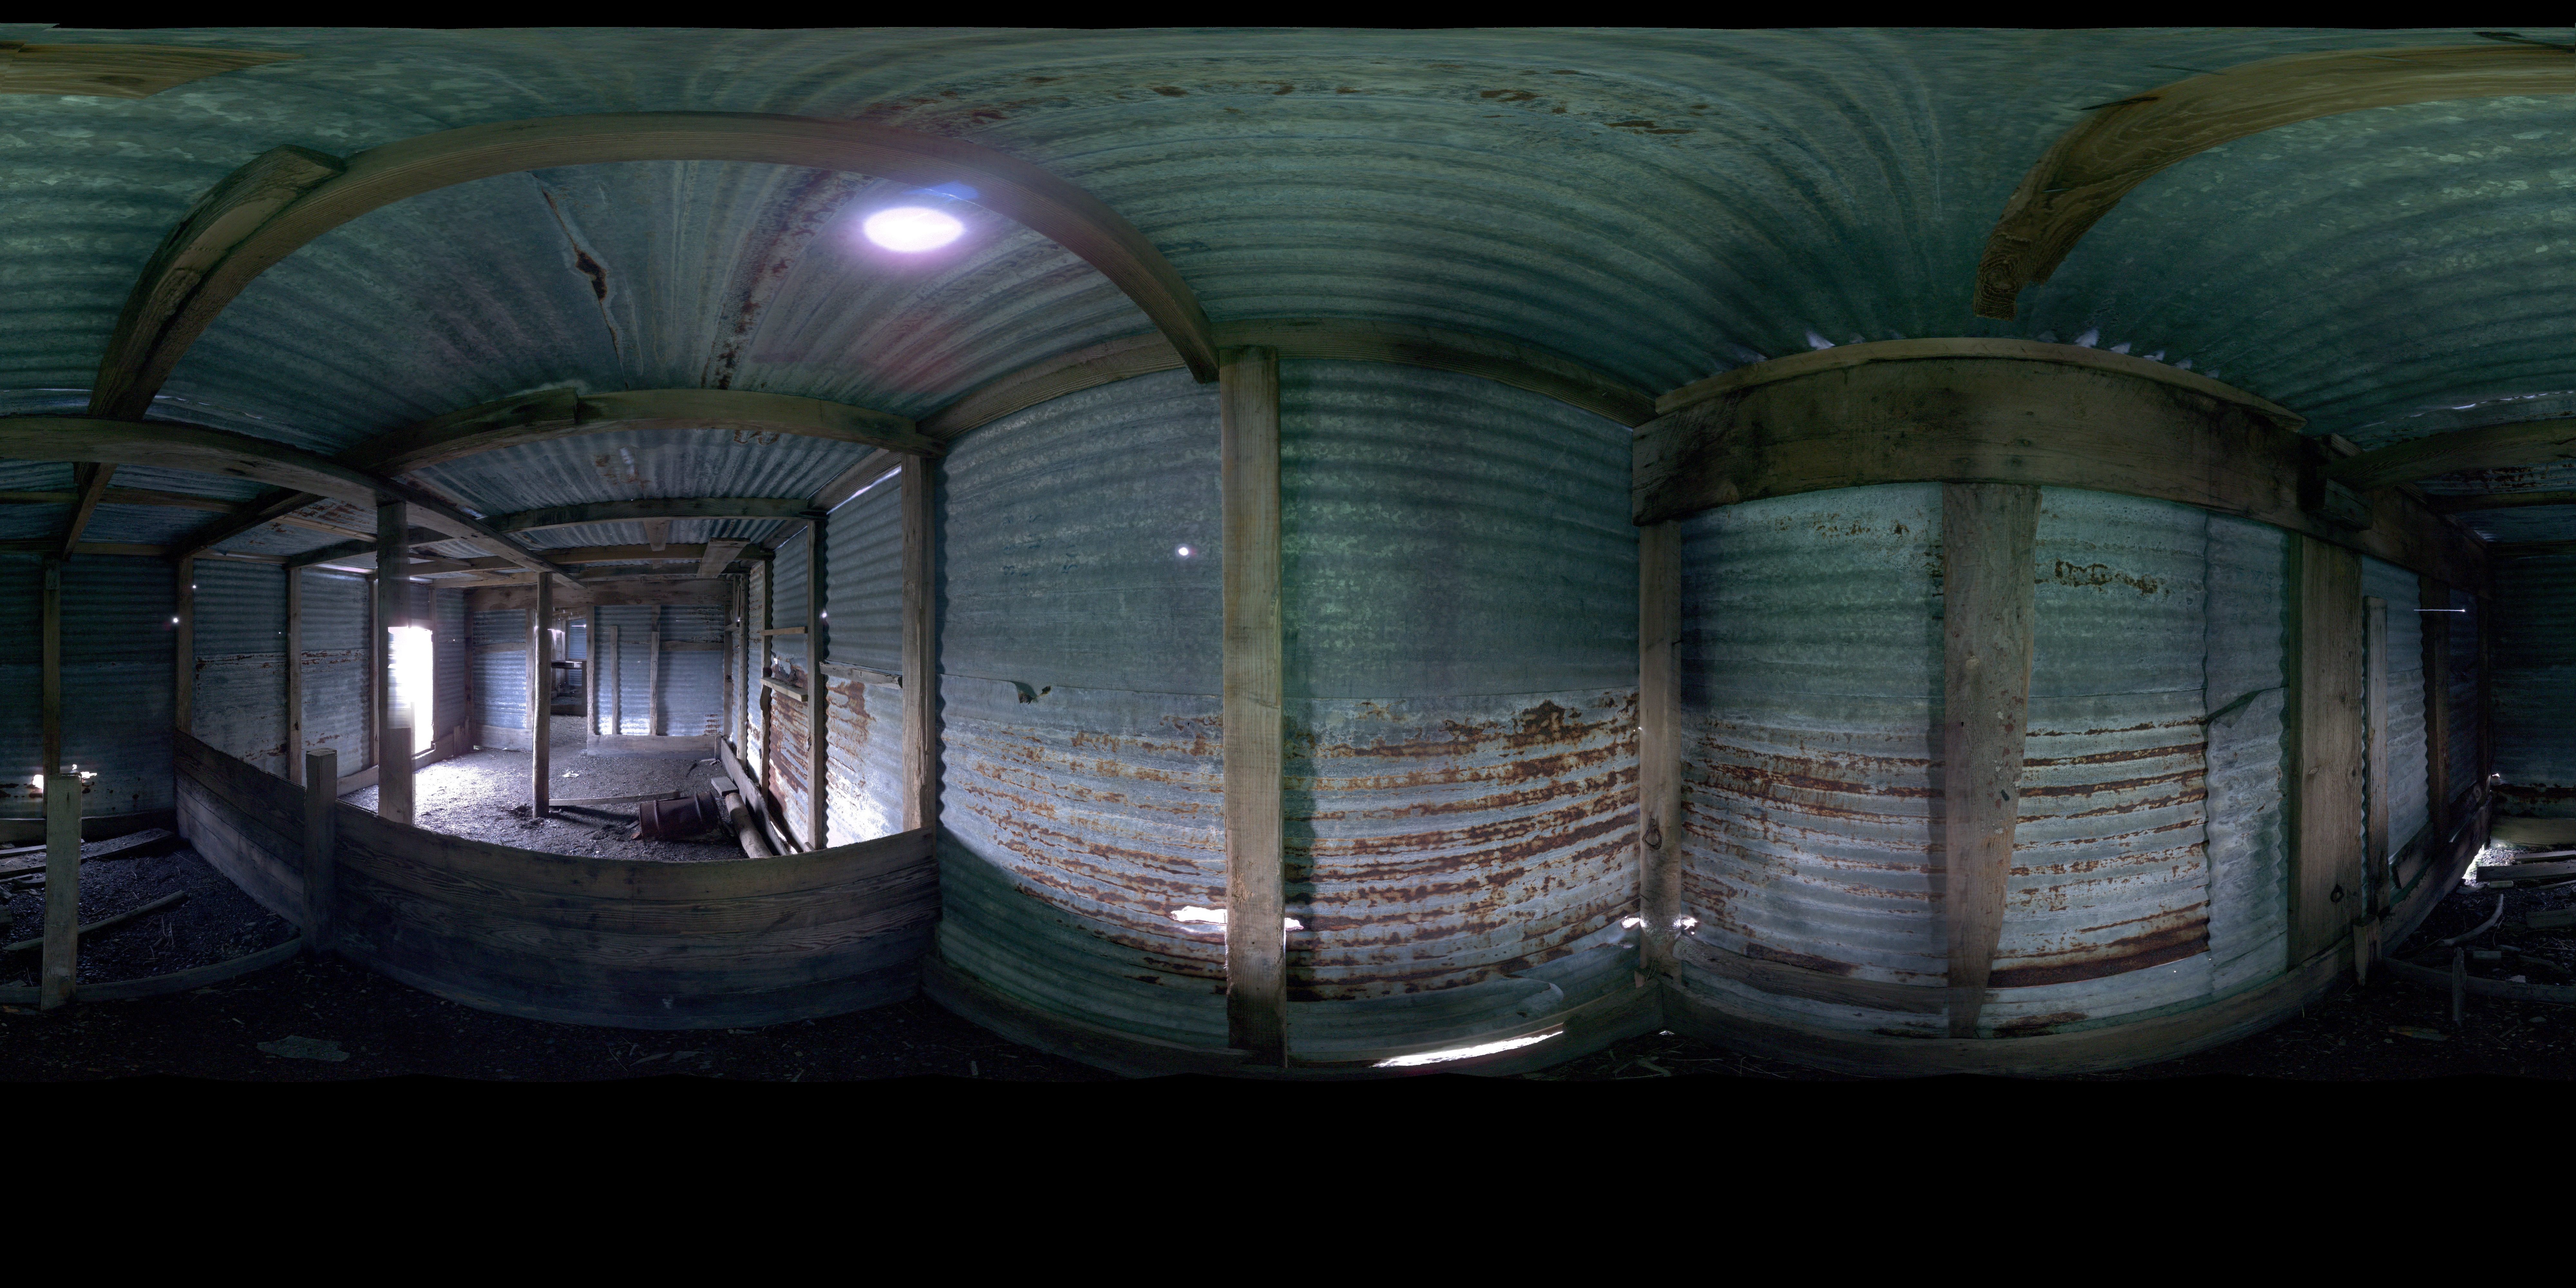 Panoramic view of the RCMP Dog Kennels and Run from the Leica BKL 360, scanning location 9.